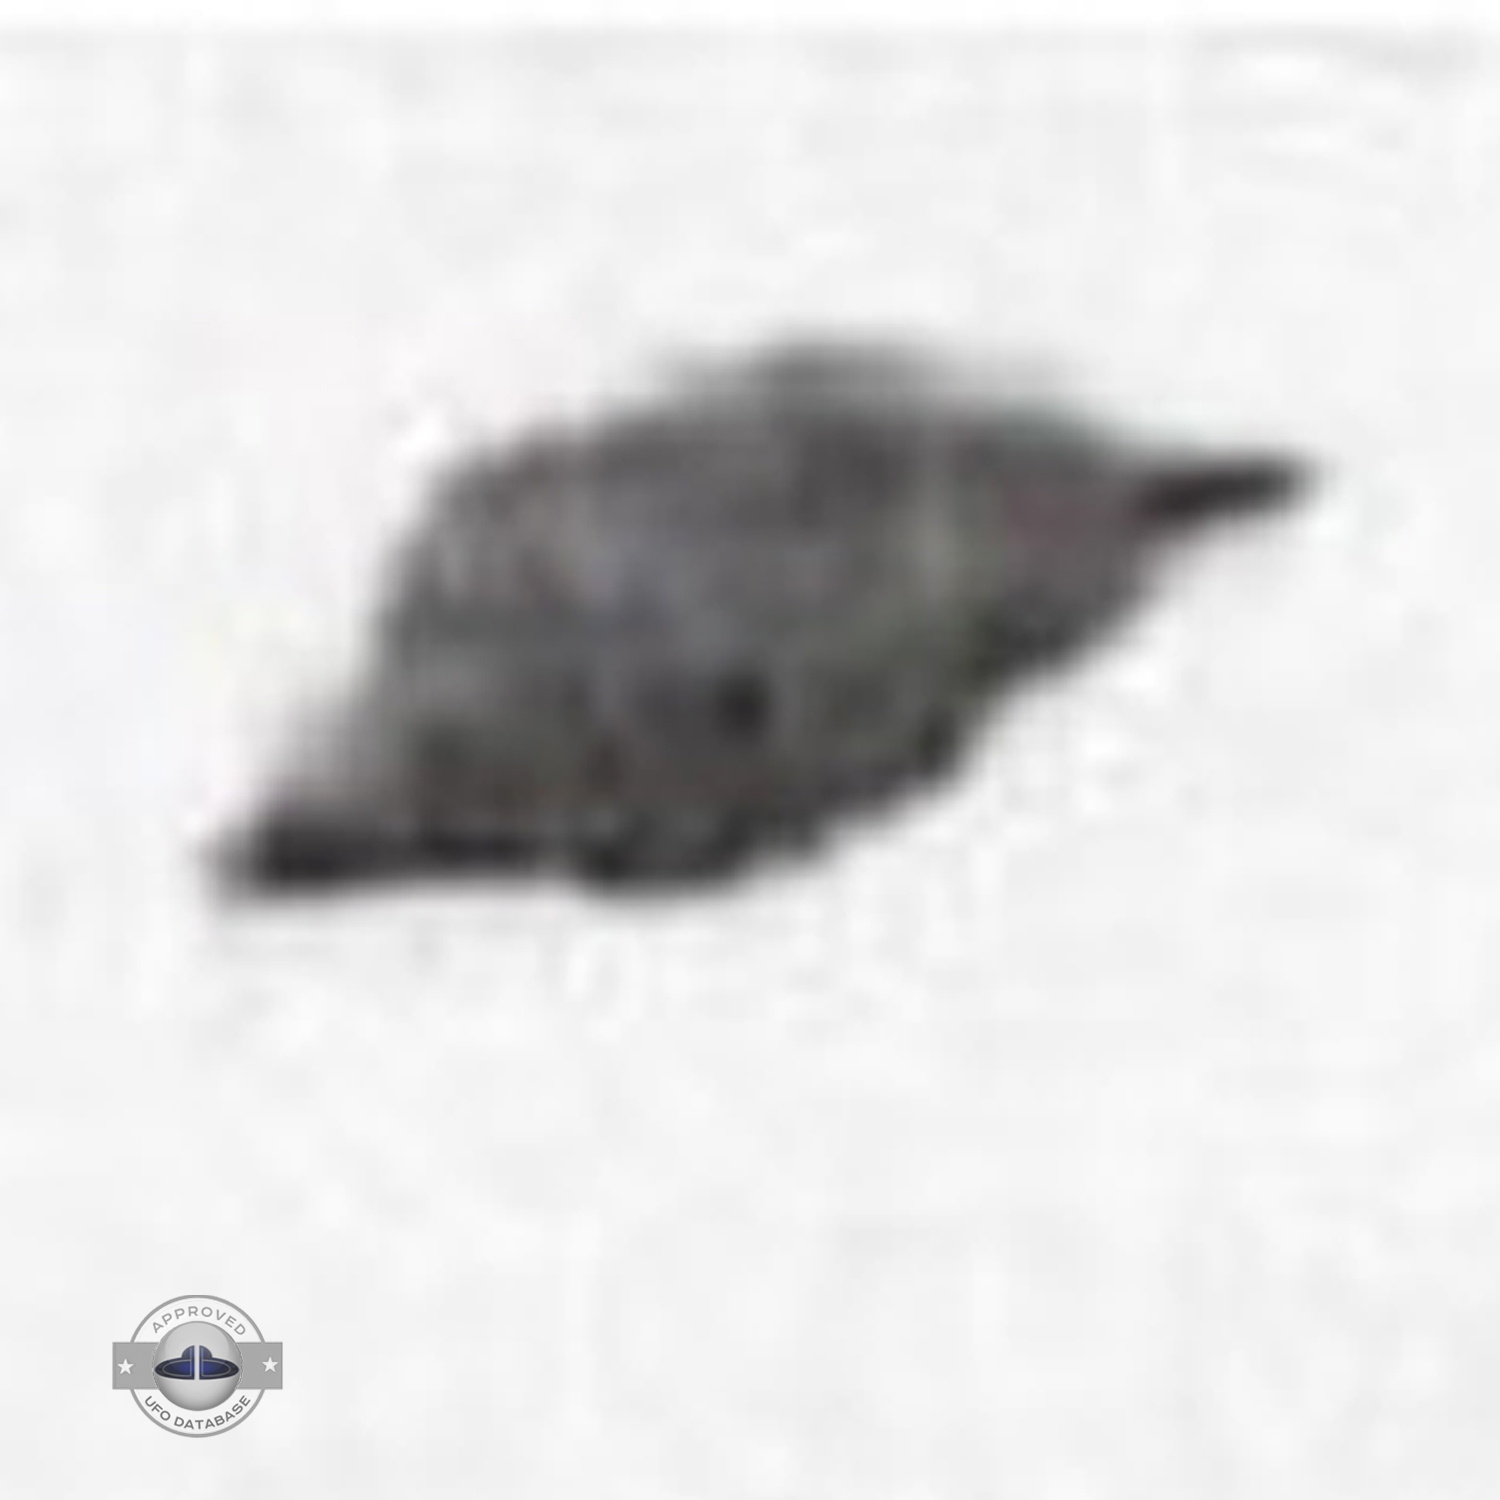 UFO sighting occurred in a small town Vidnoye in the Moscow Oblast UFO Picture #159-5